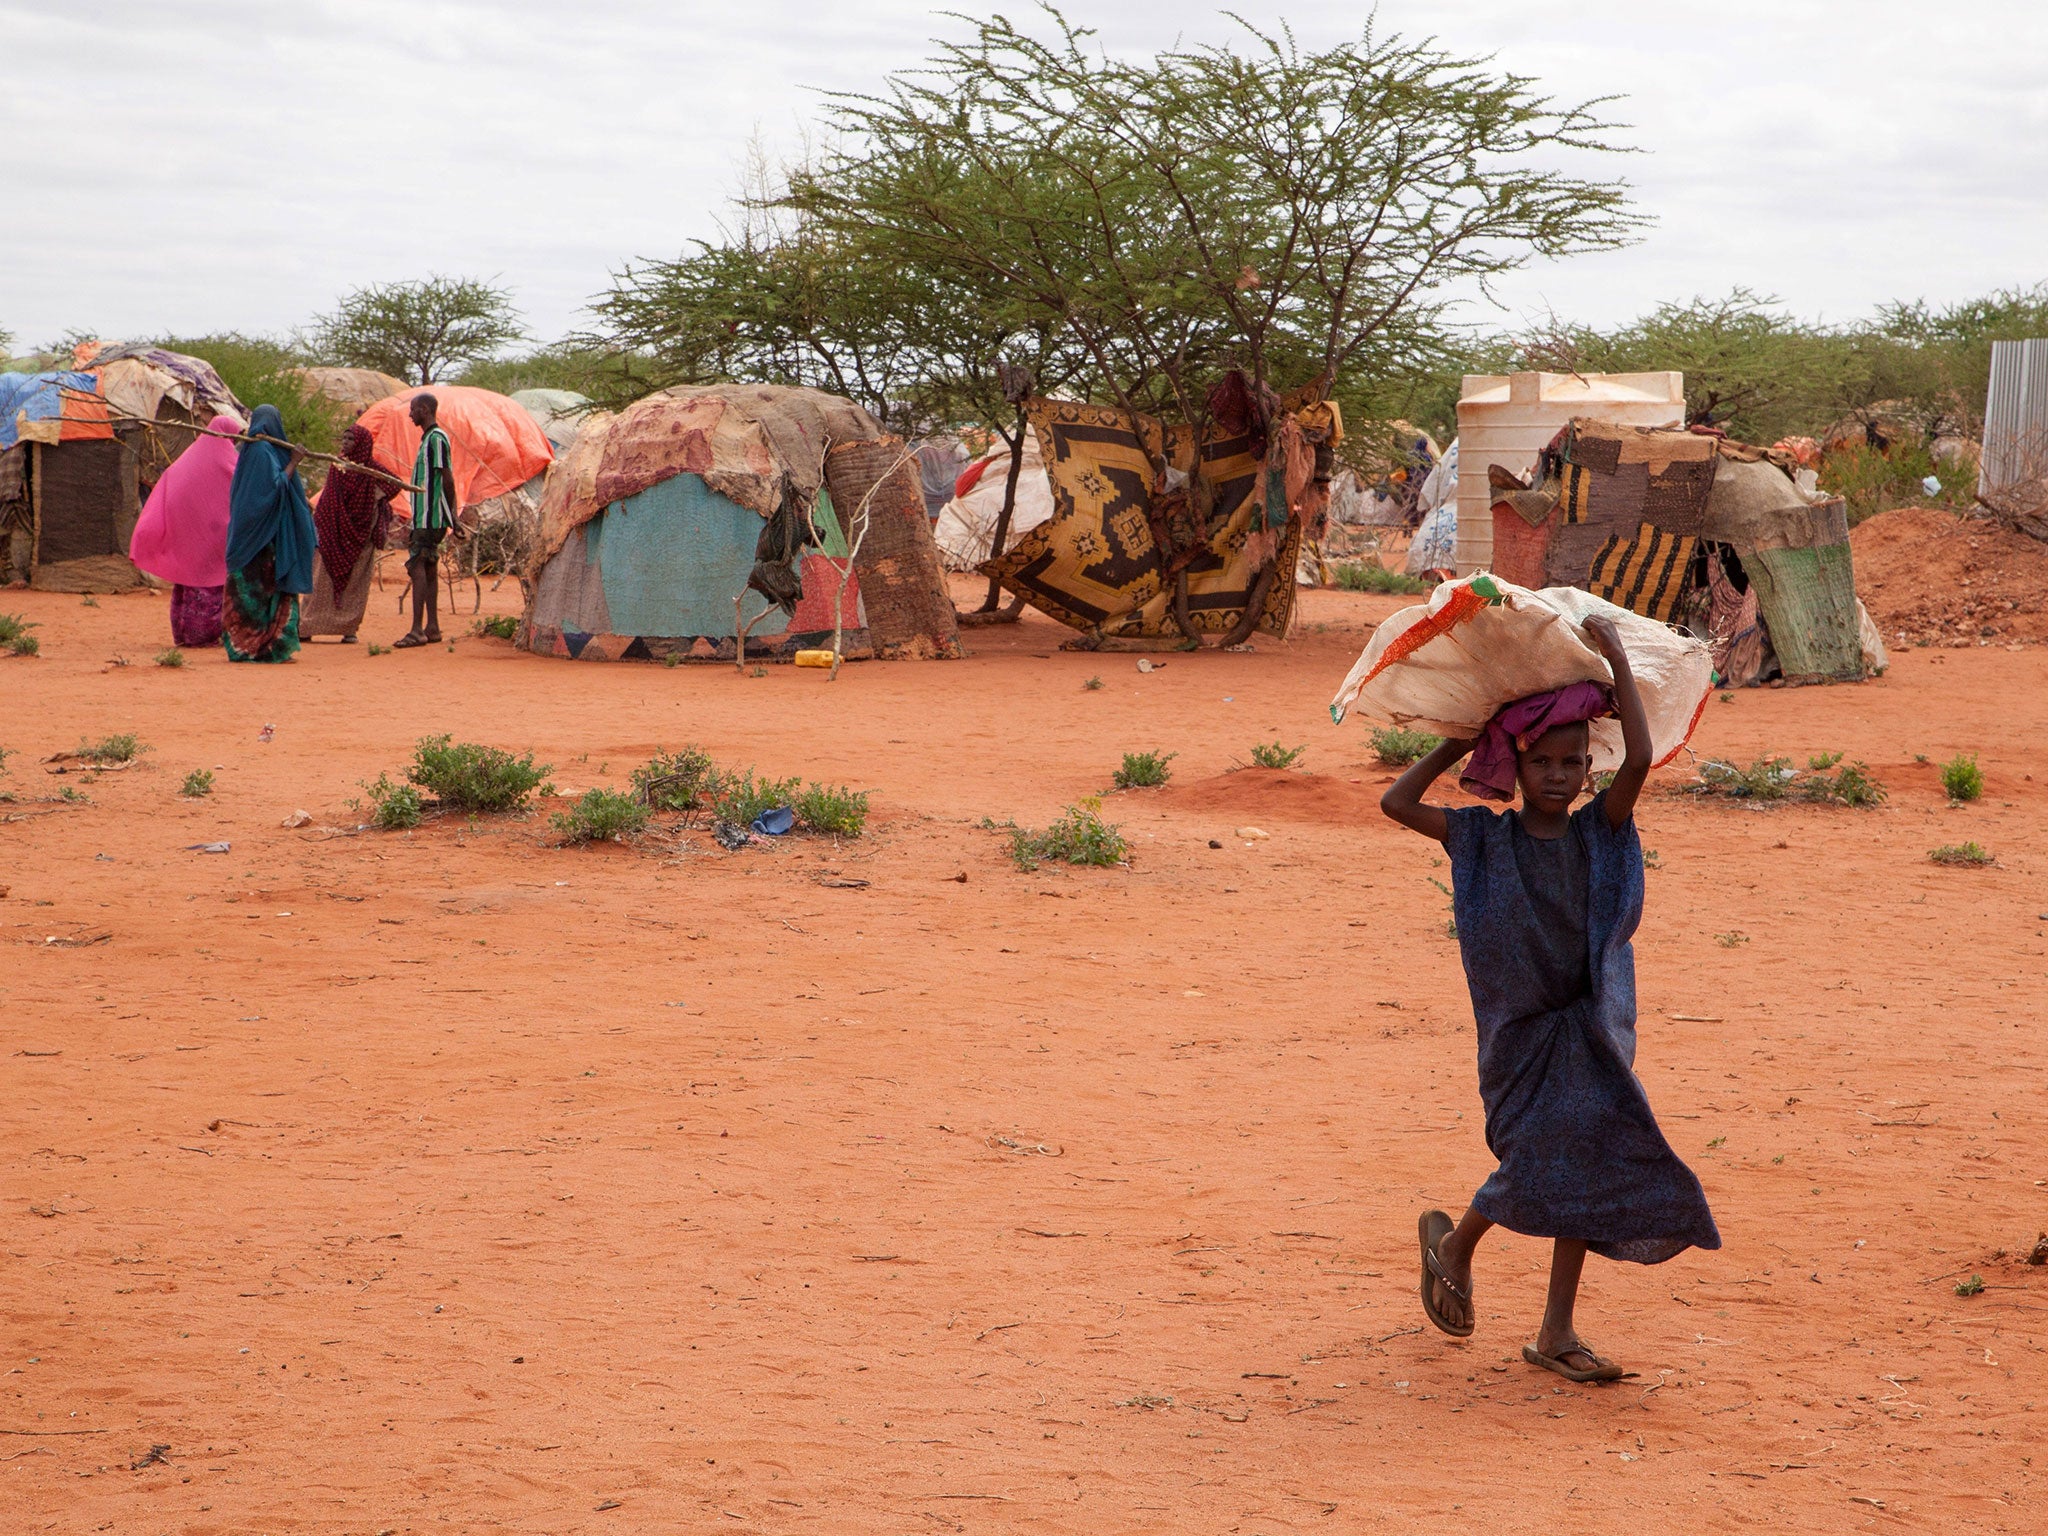 A child carrying a bag in a displaced persons camp due to Ethiopia's drought in Wender on 9 June 2017